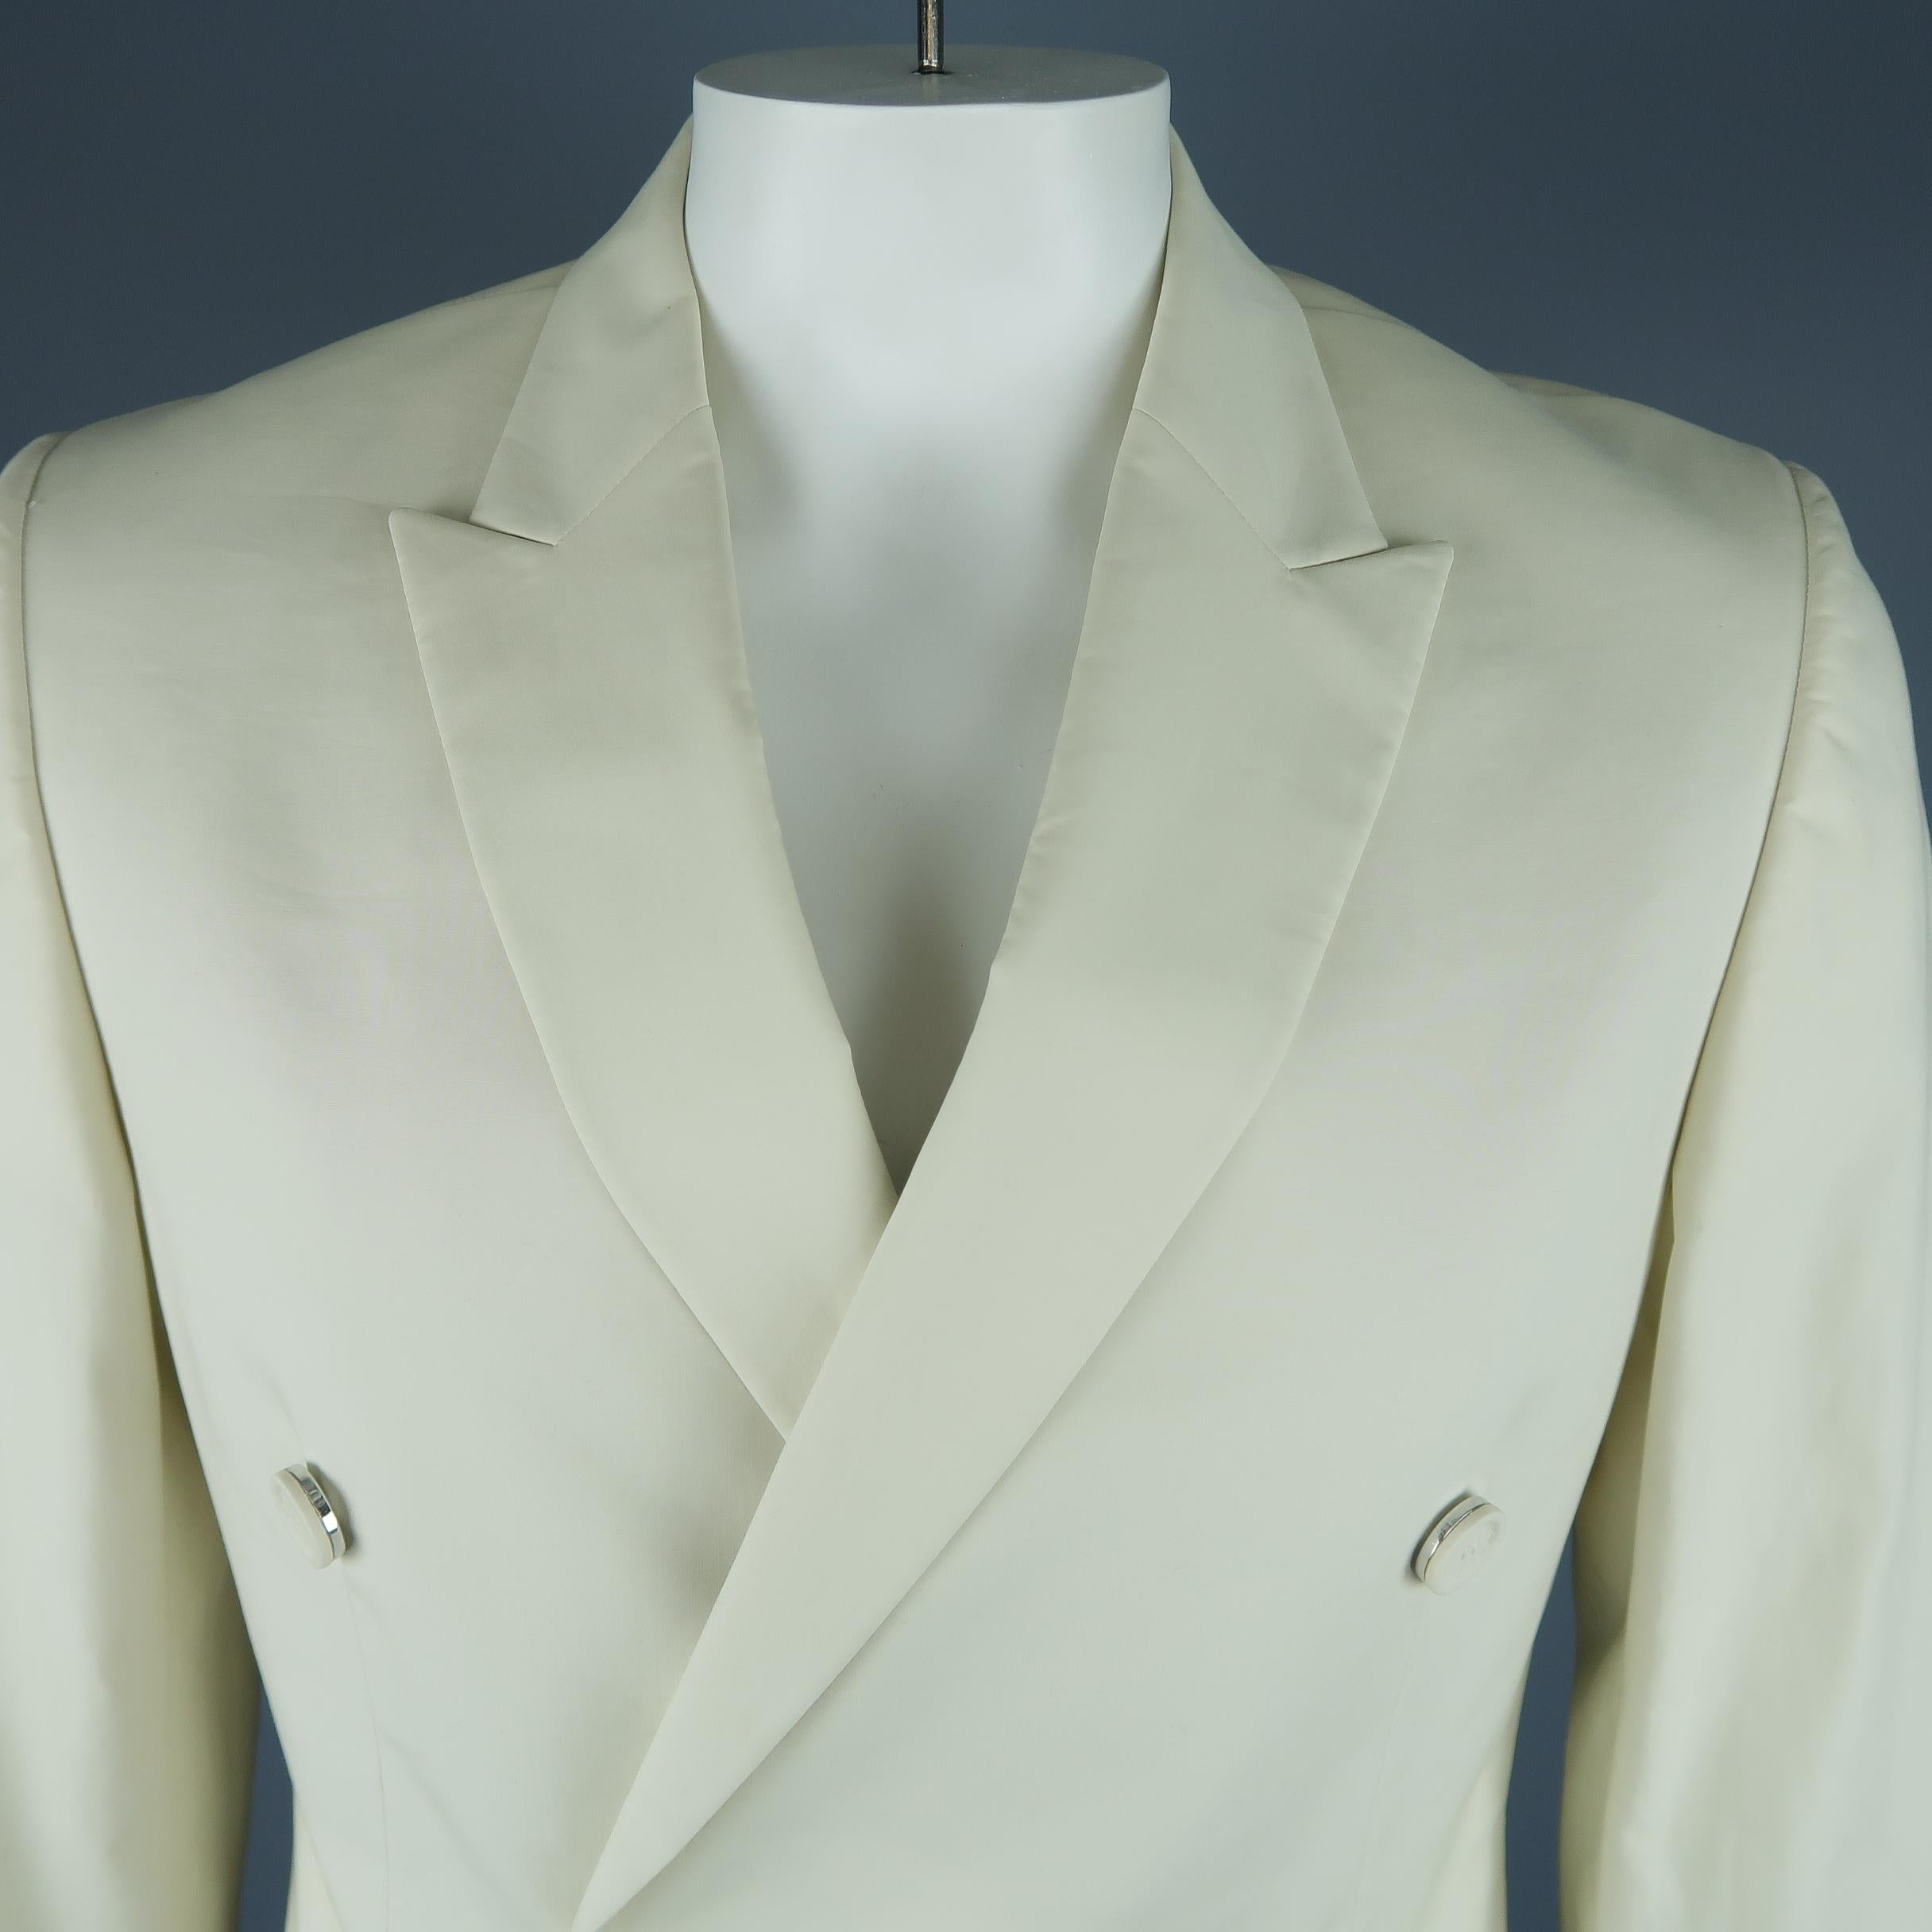 Double breasted CALVIN KLEIN COLLECTION sport coat comes in light weight bone beige bonded cotton with a peak lapel fabric faced, silver tone metal buttons, and flap pockets. Made in Italy.
 
New with Tags.
Marked: IT 52
 
Measurements:
 
Shoulder: